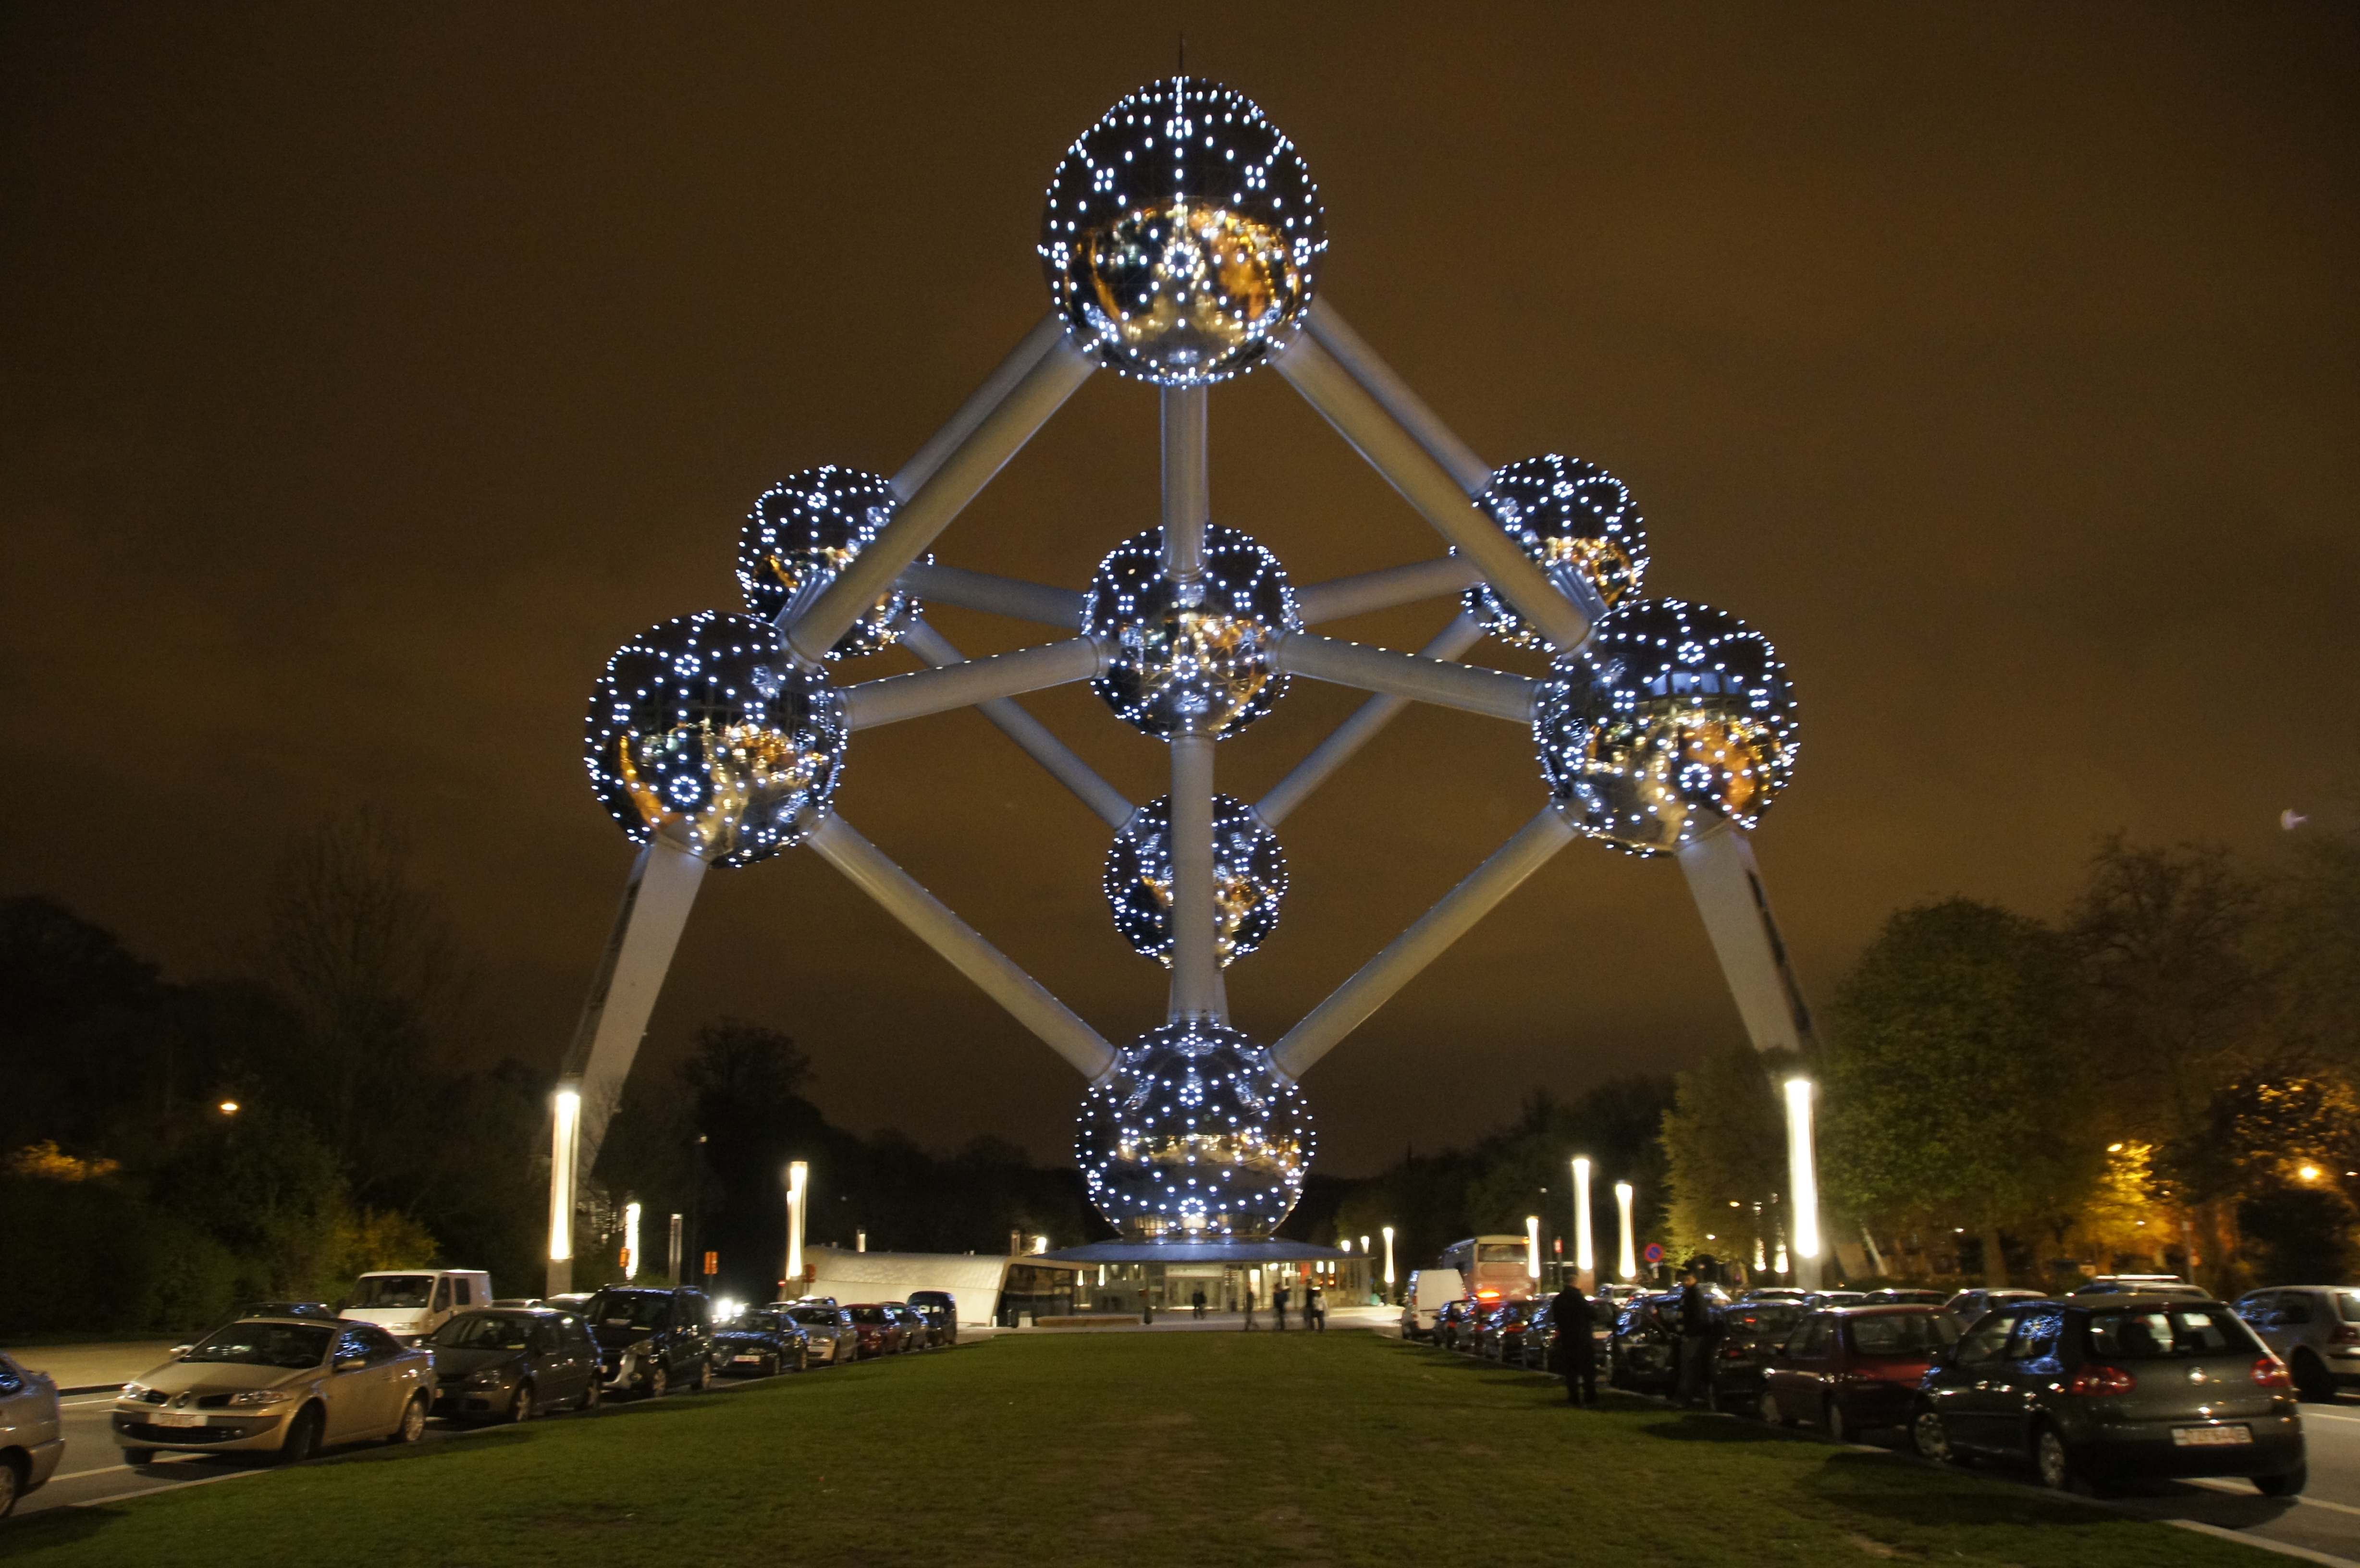 A word about Atomium